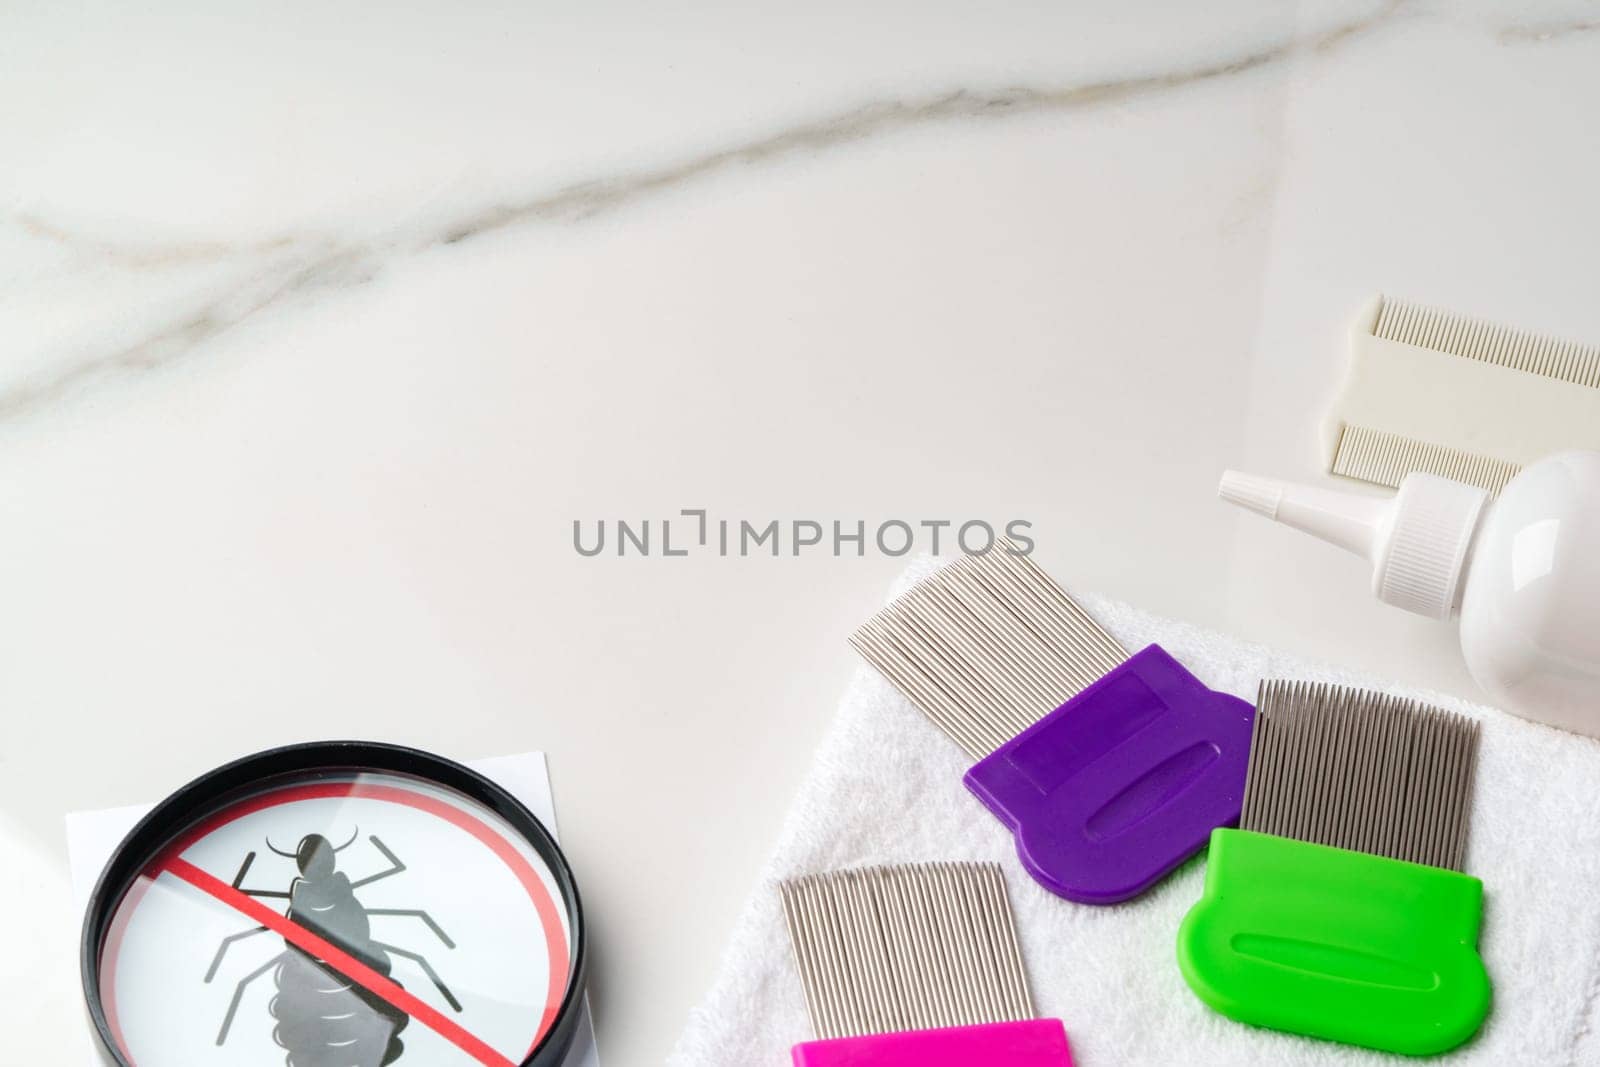 Comb, anti lice medicine and towel on white background by Fabrikasimf